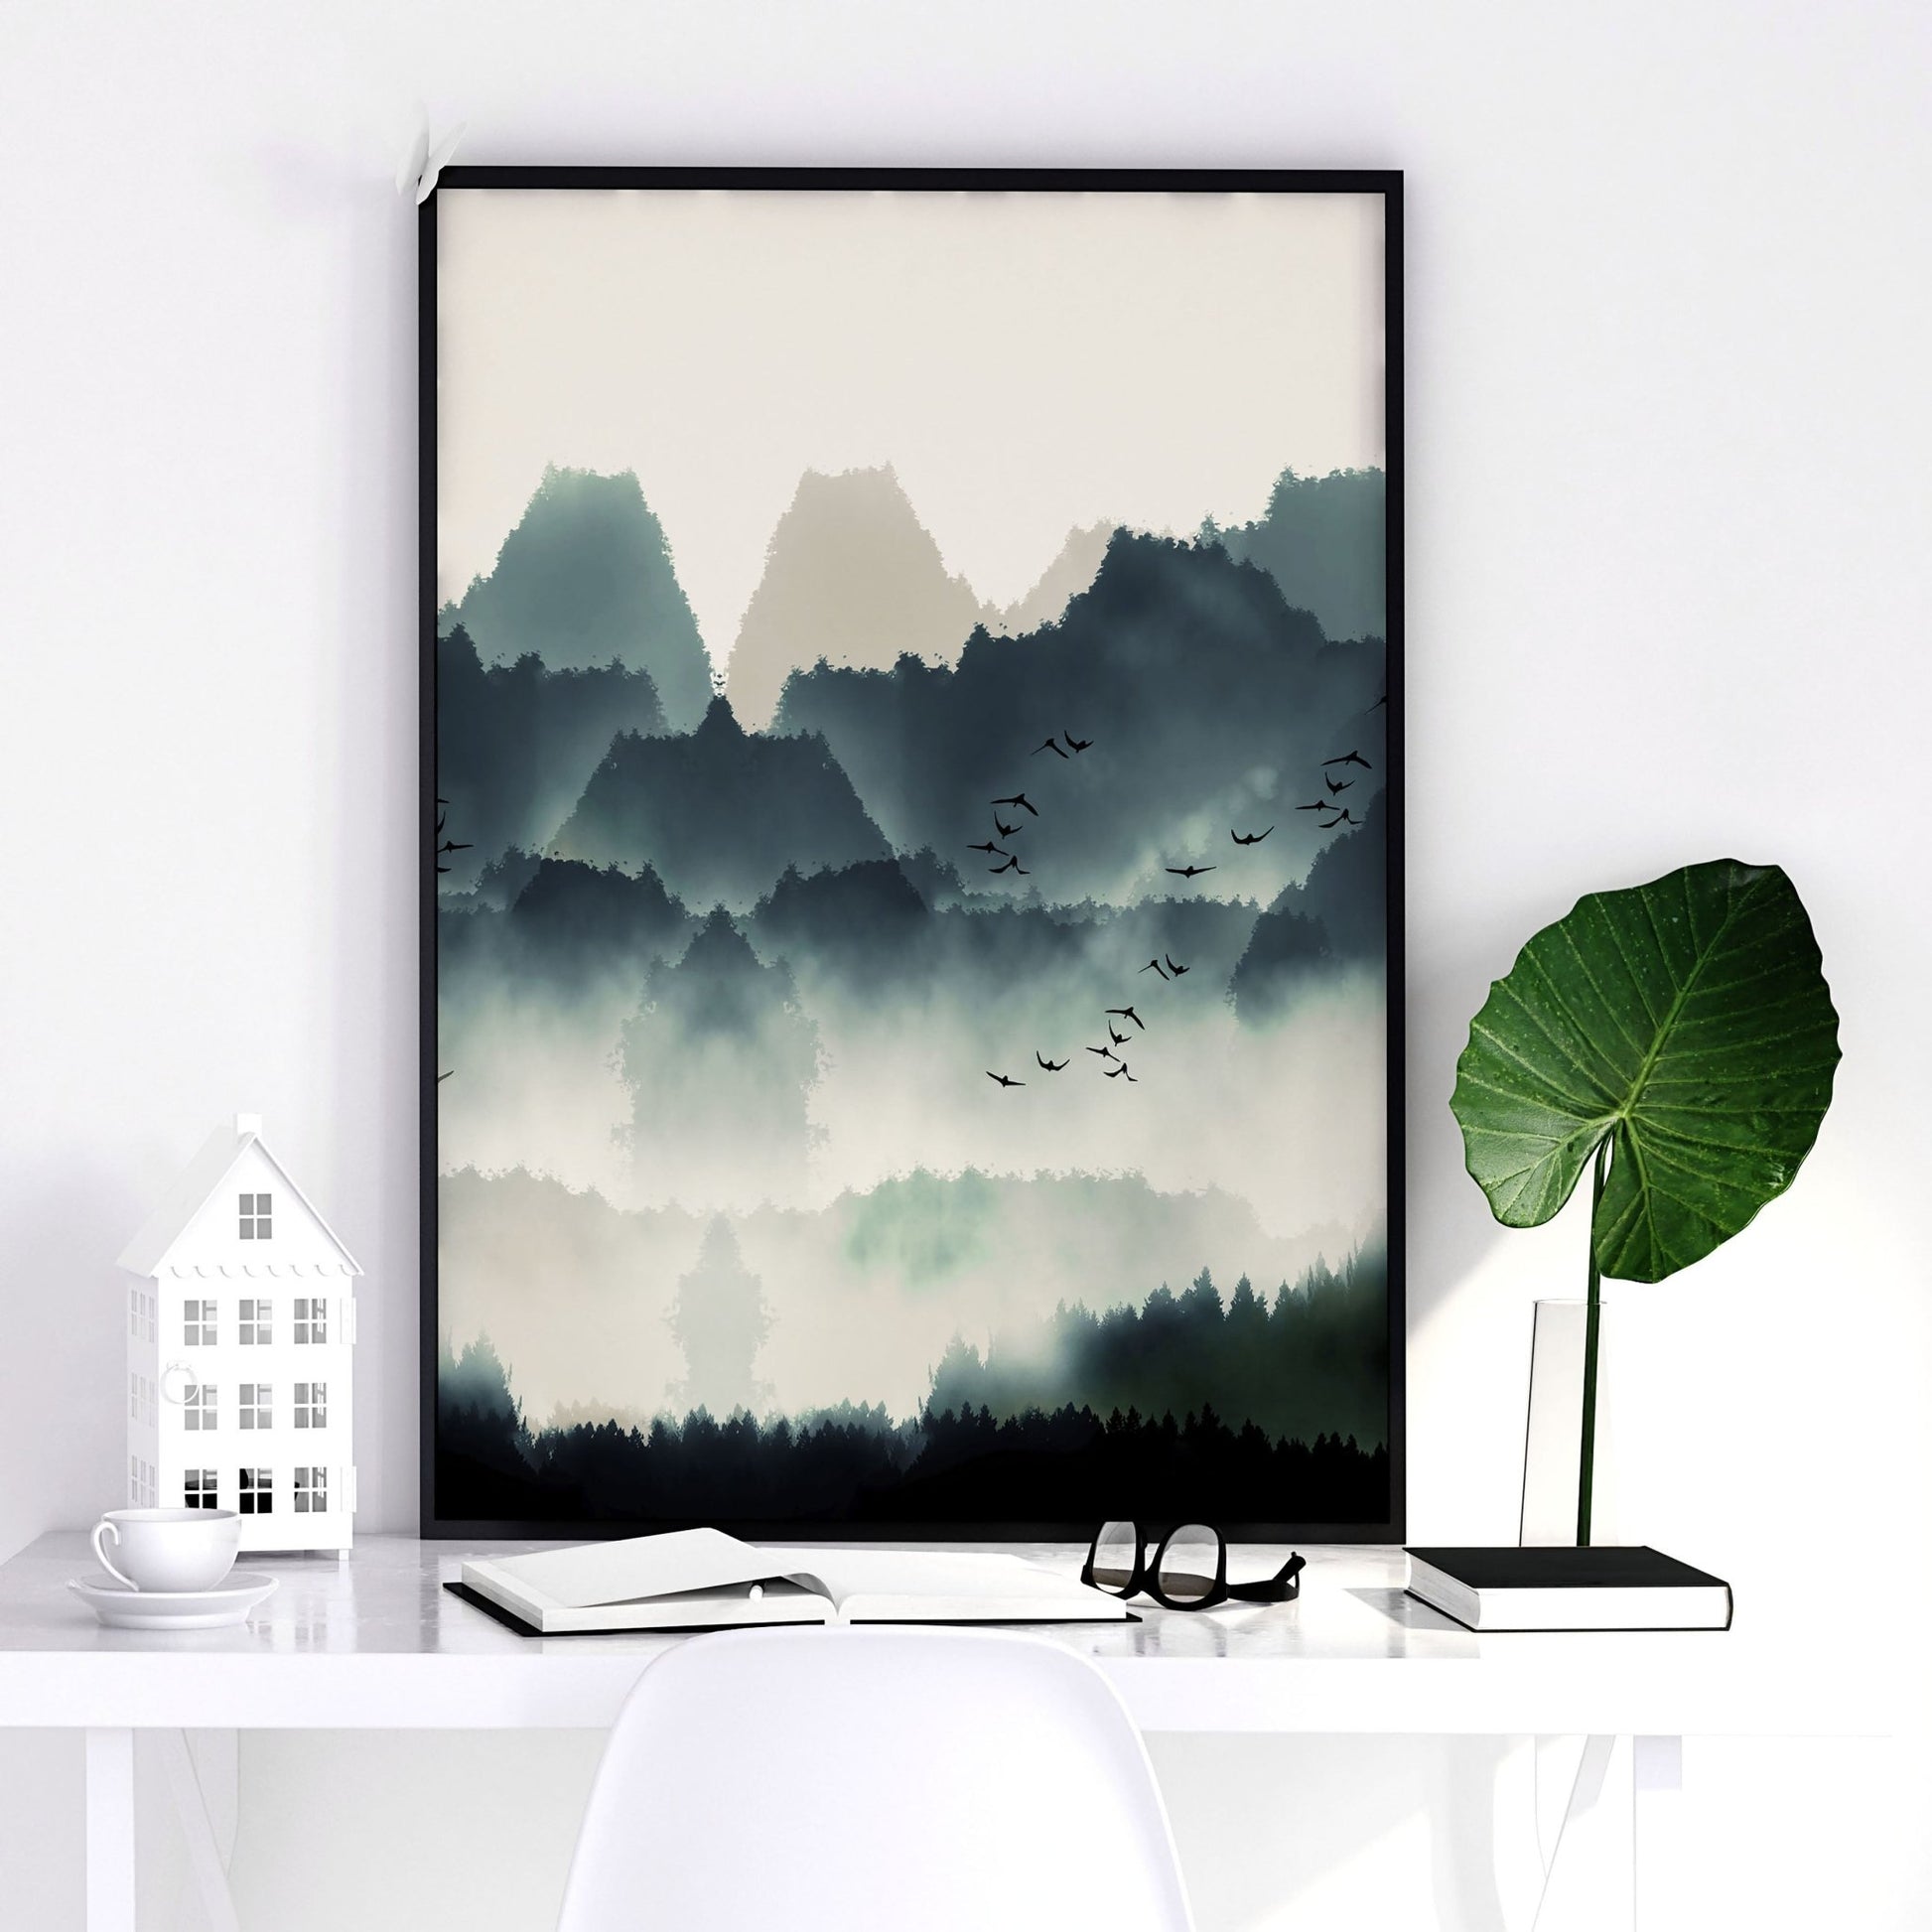 Wall decor for the office | set of 3 wall art prints